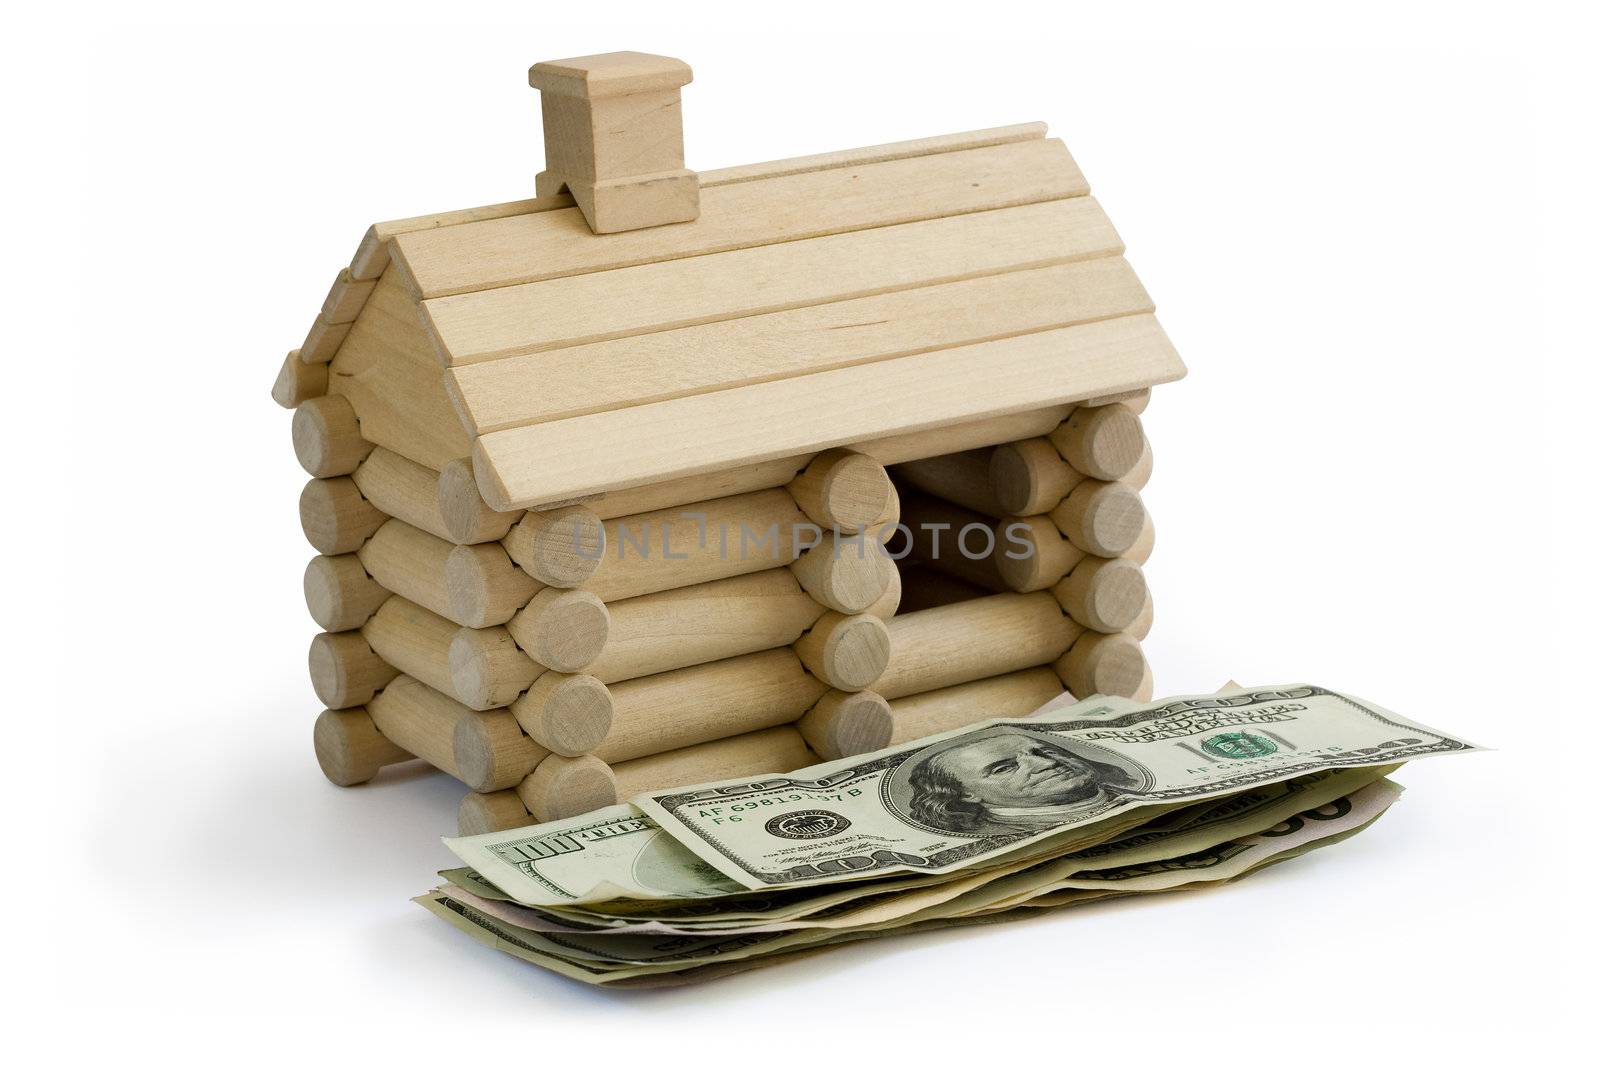 Miniature Log House building model and money dollar bills in foreground. Clipping path included to remove object shadow or replace background.